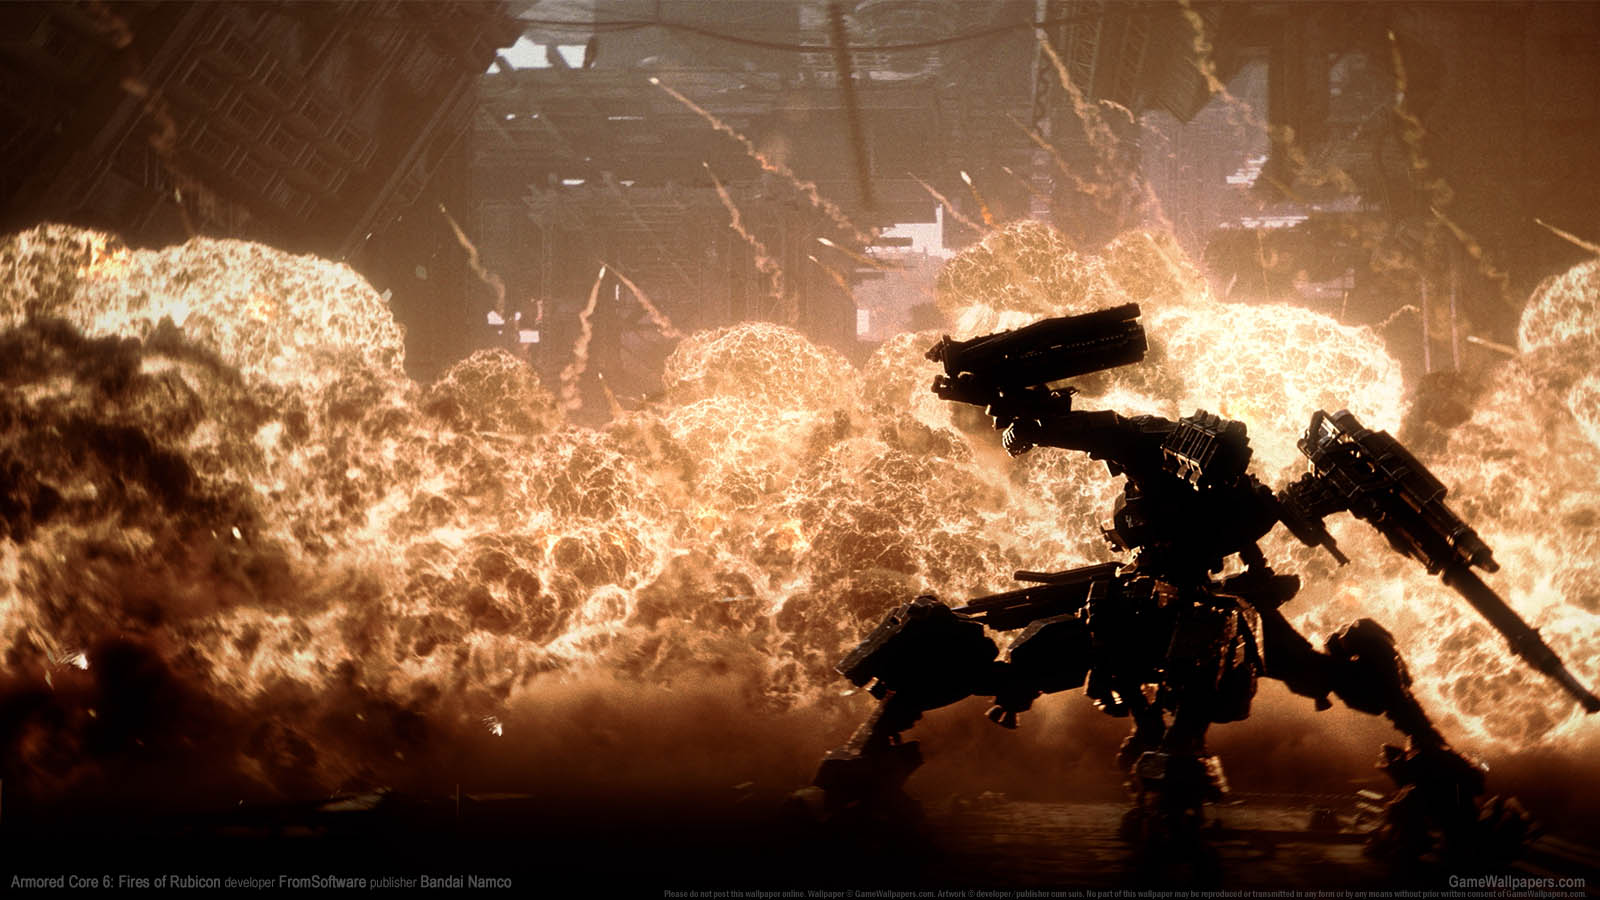 Armored Core 6: Fires of Rubicon fond d'cran 01 1600x900